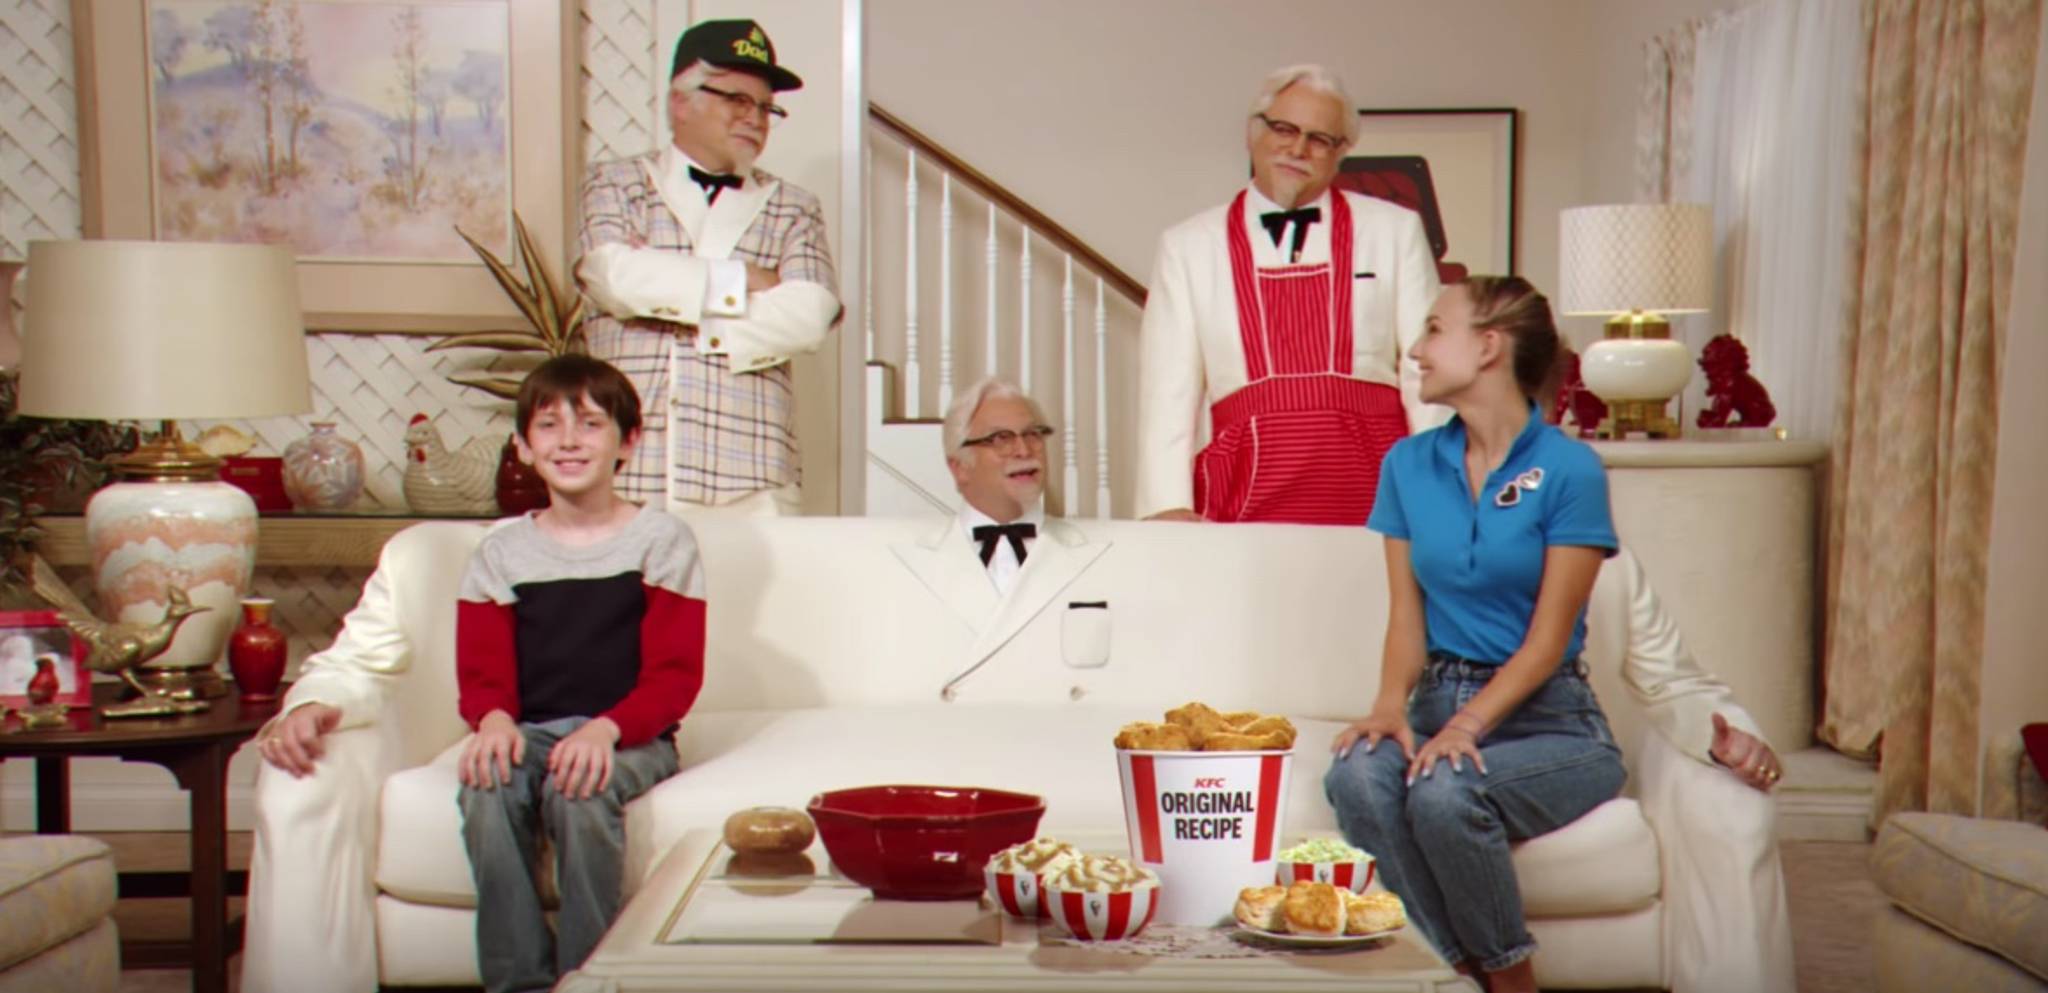 KFC What’s for Dinner ad is a surreal take on 80’s sitcoms